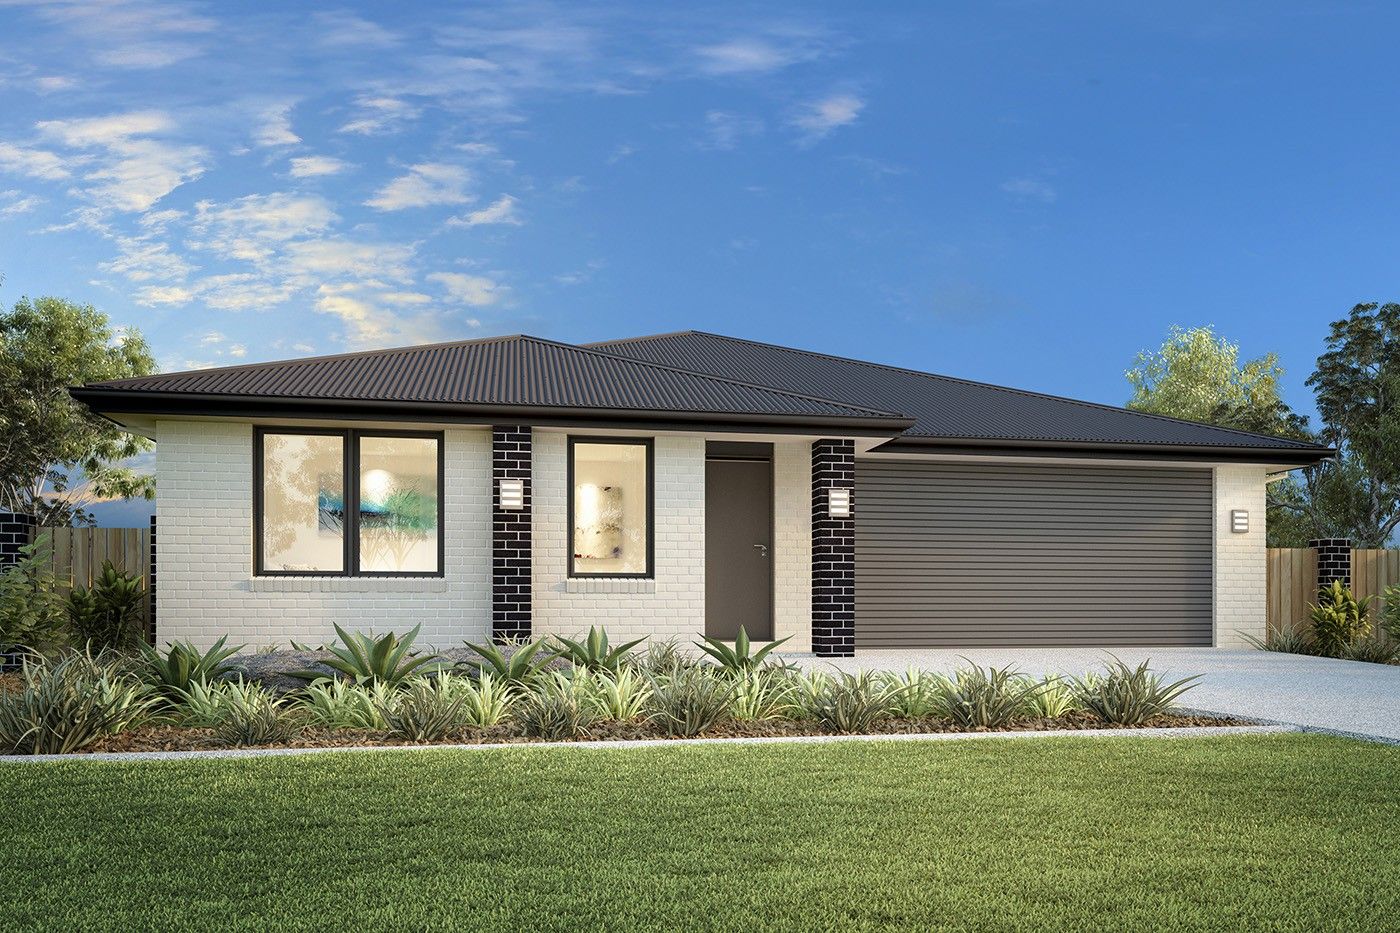 4 bedrooms New House & Land in Lot 3102 Tamichael way- Aspire title Q4 2022 FRASER RISE VIC, 3336